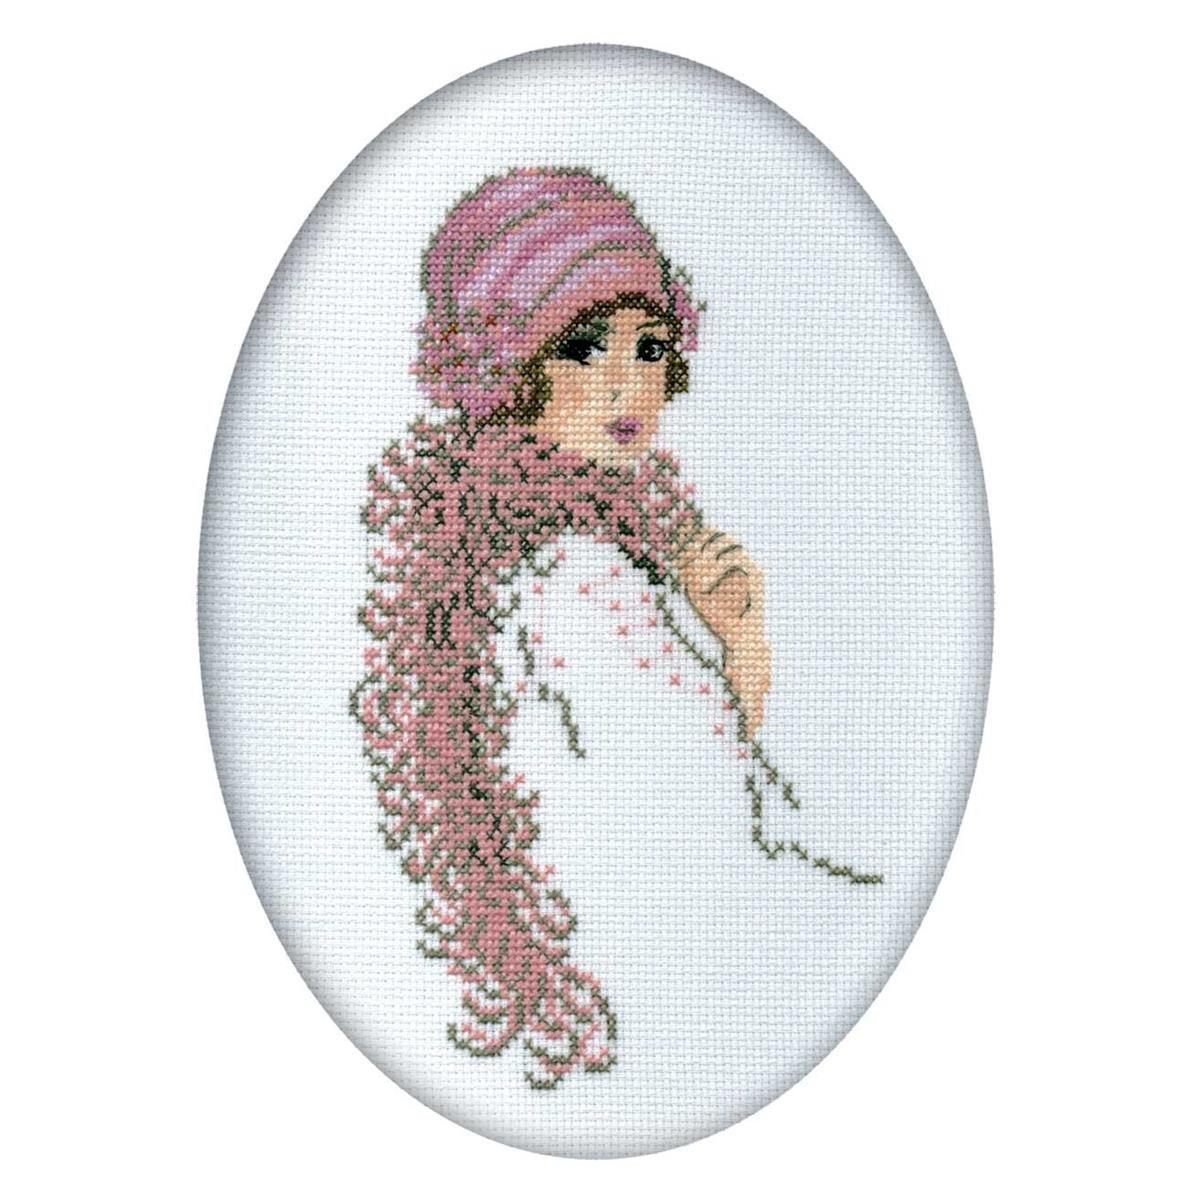 RTO counted Cross Stitch Kit "Lady in Boa"...